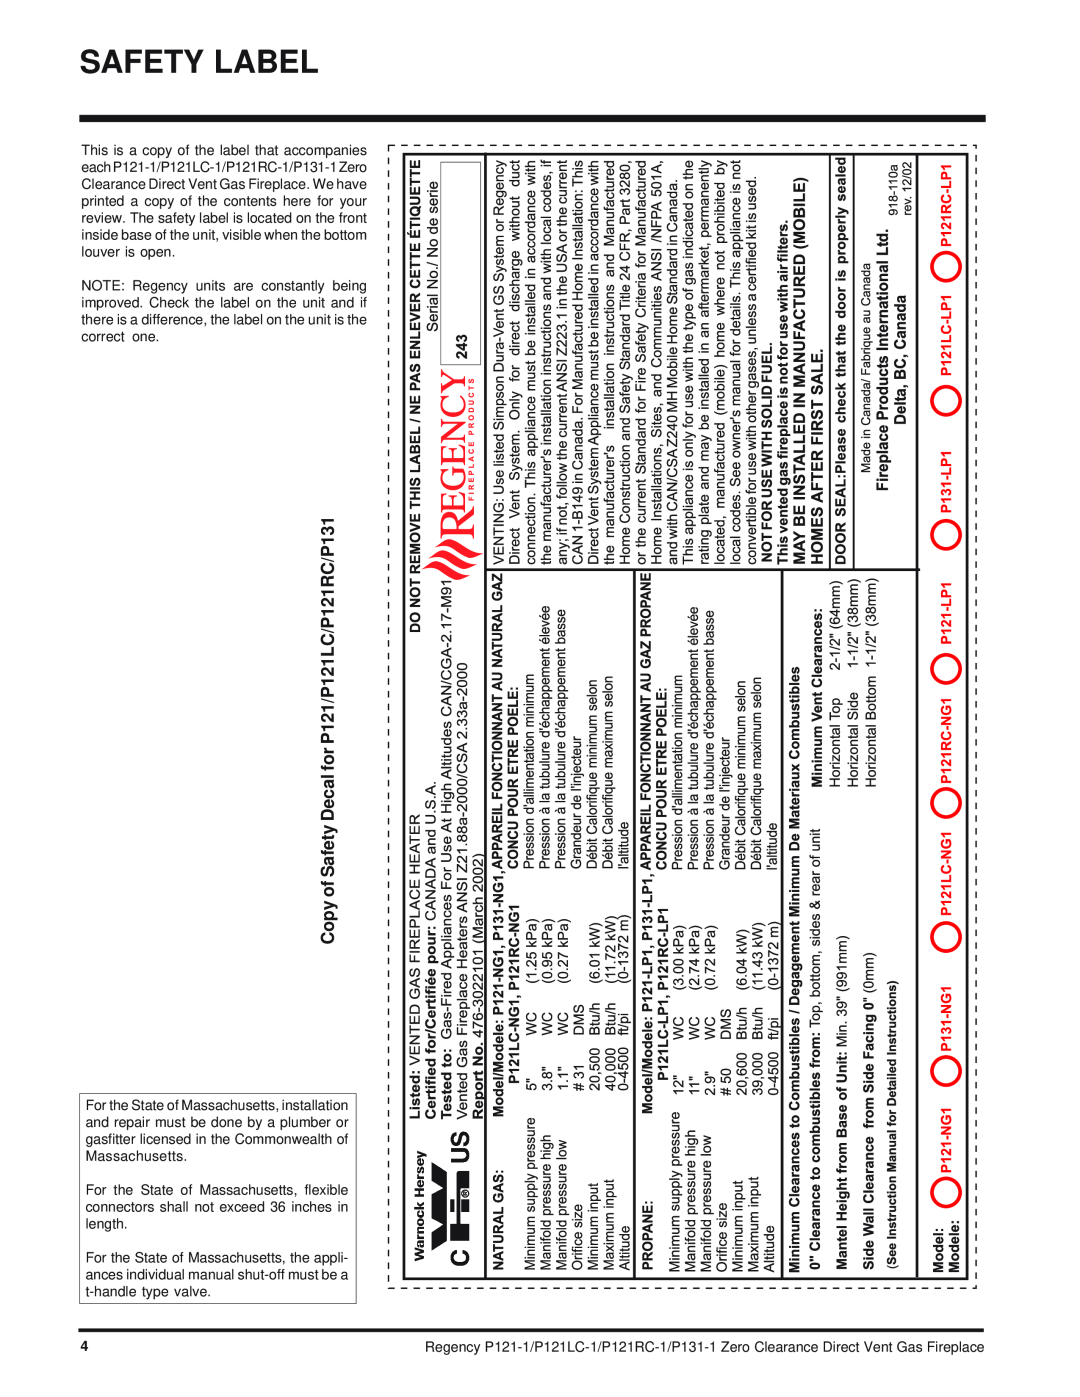 Regency installation manual Safety Label, Copy of Safety Decal for P121/P121LC/P121RC/P131 